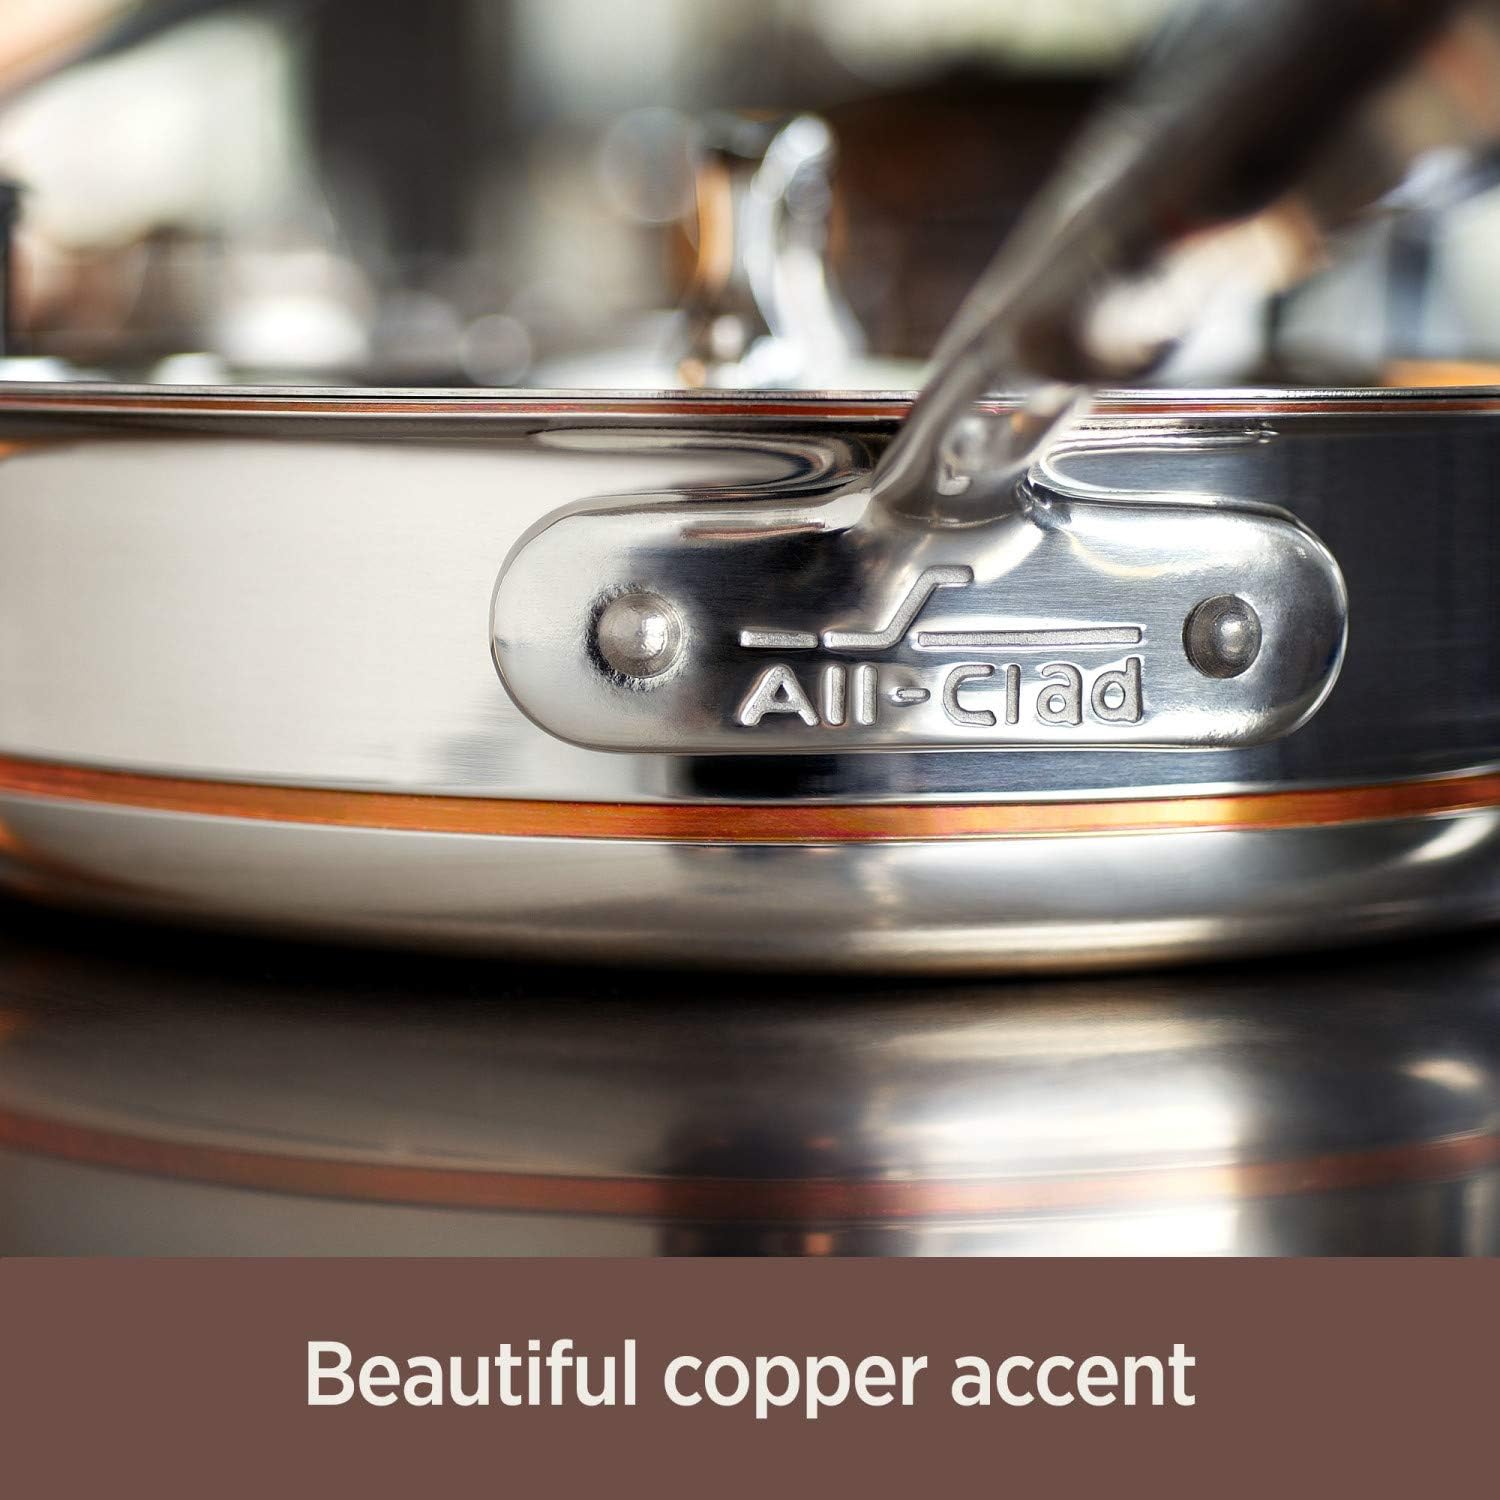 All-Clad Copper Core 5-Ply Stainless Steel Sauté Pan with Steel Lid 5 Quart  Induction Oven Broil Safe 600F Pots and Pans, Cookware